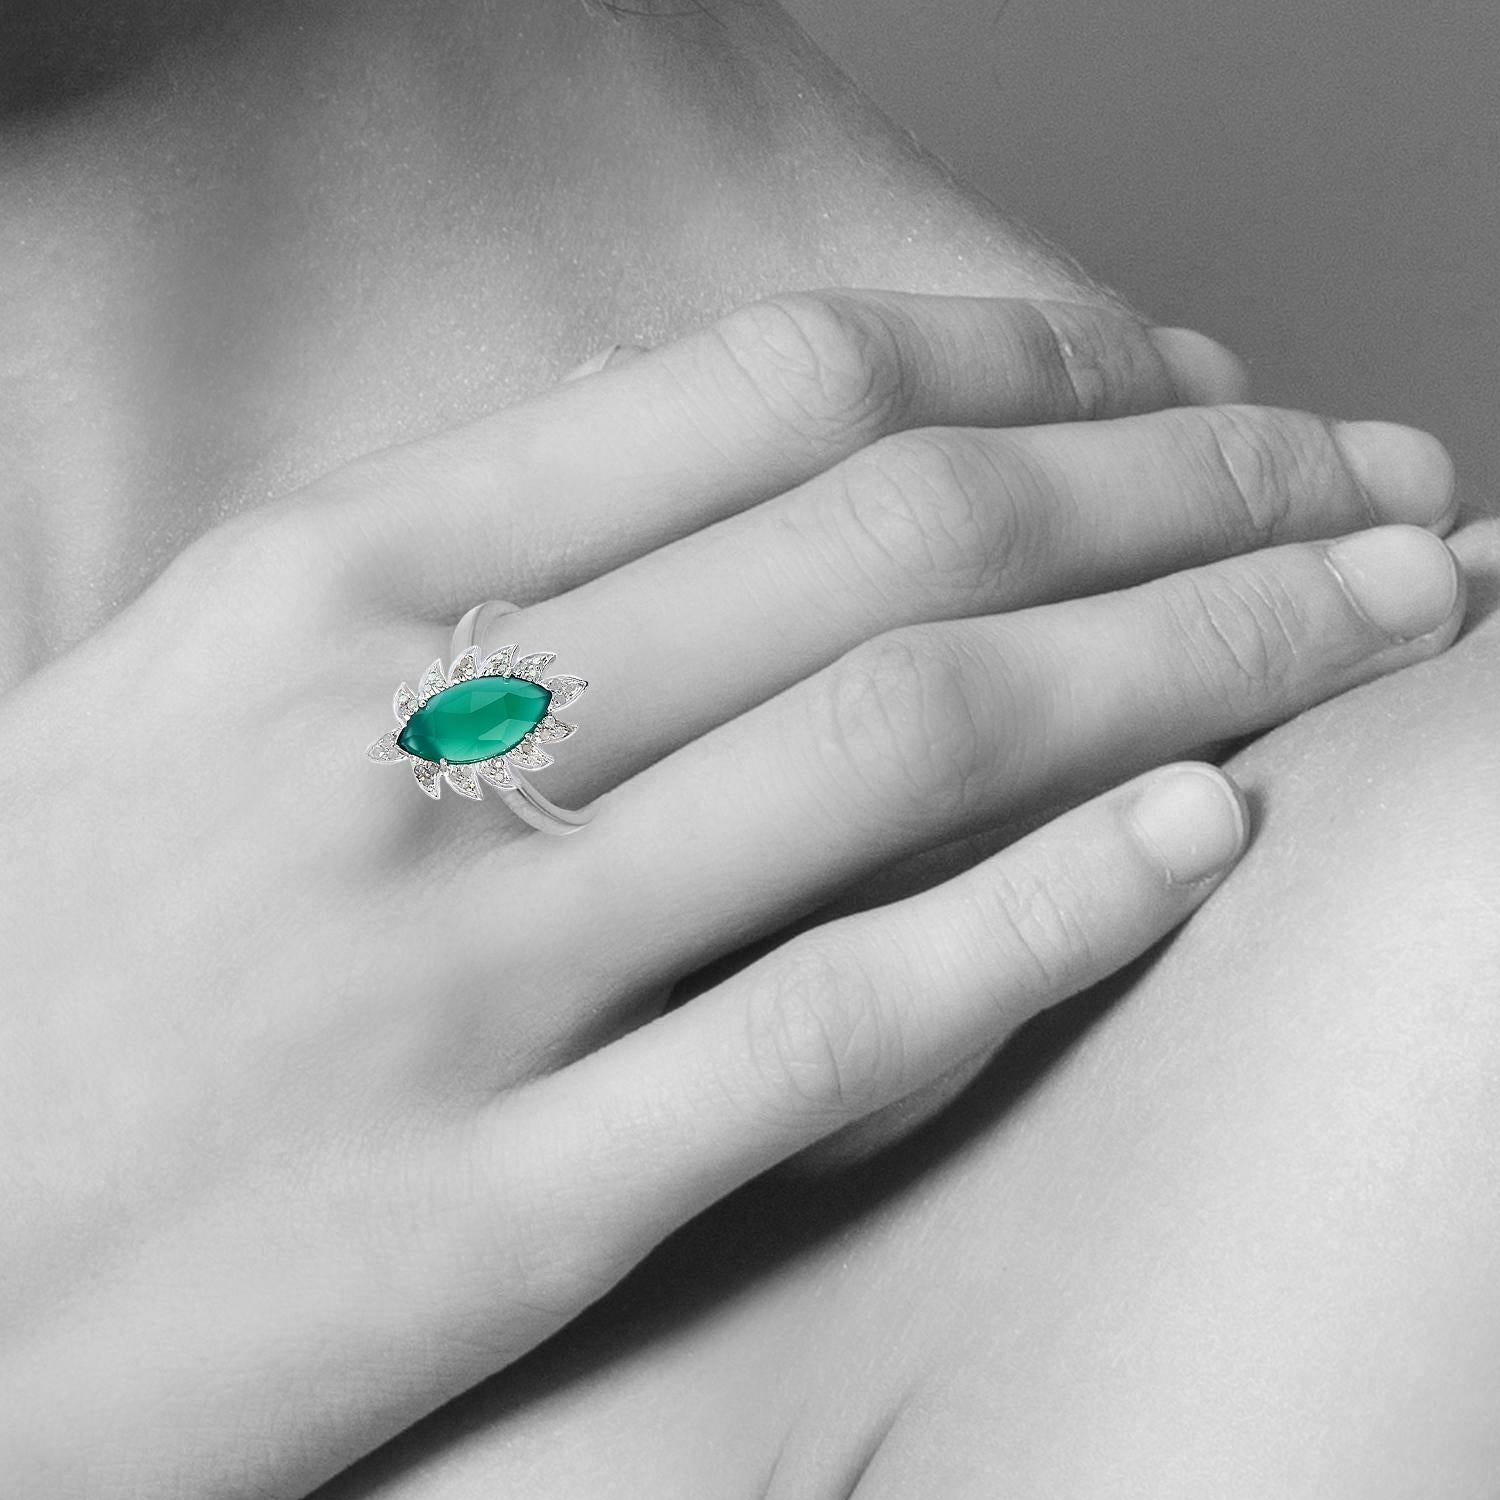 This Claw ring, it extrudes sophistication and elegance. Handcrafted in  18K gold & sterling silver. Claw pave arches are enhanced with sparkling 0.71 ct diamonds with a marquise shape 7.54 ct Green Onyx in center.

18K 1.46 grams,Sterling Silver